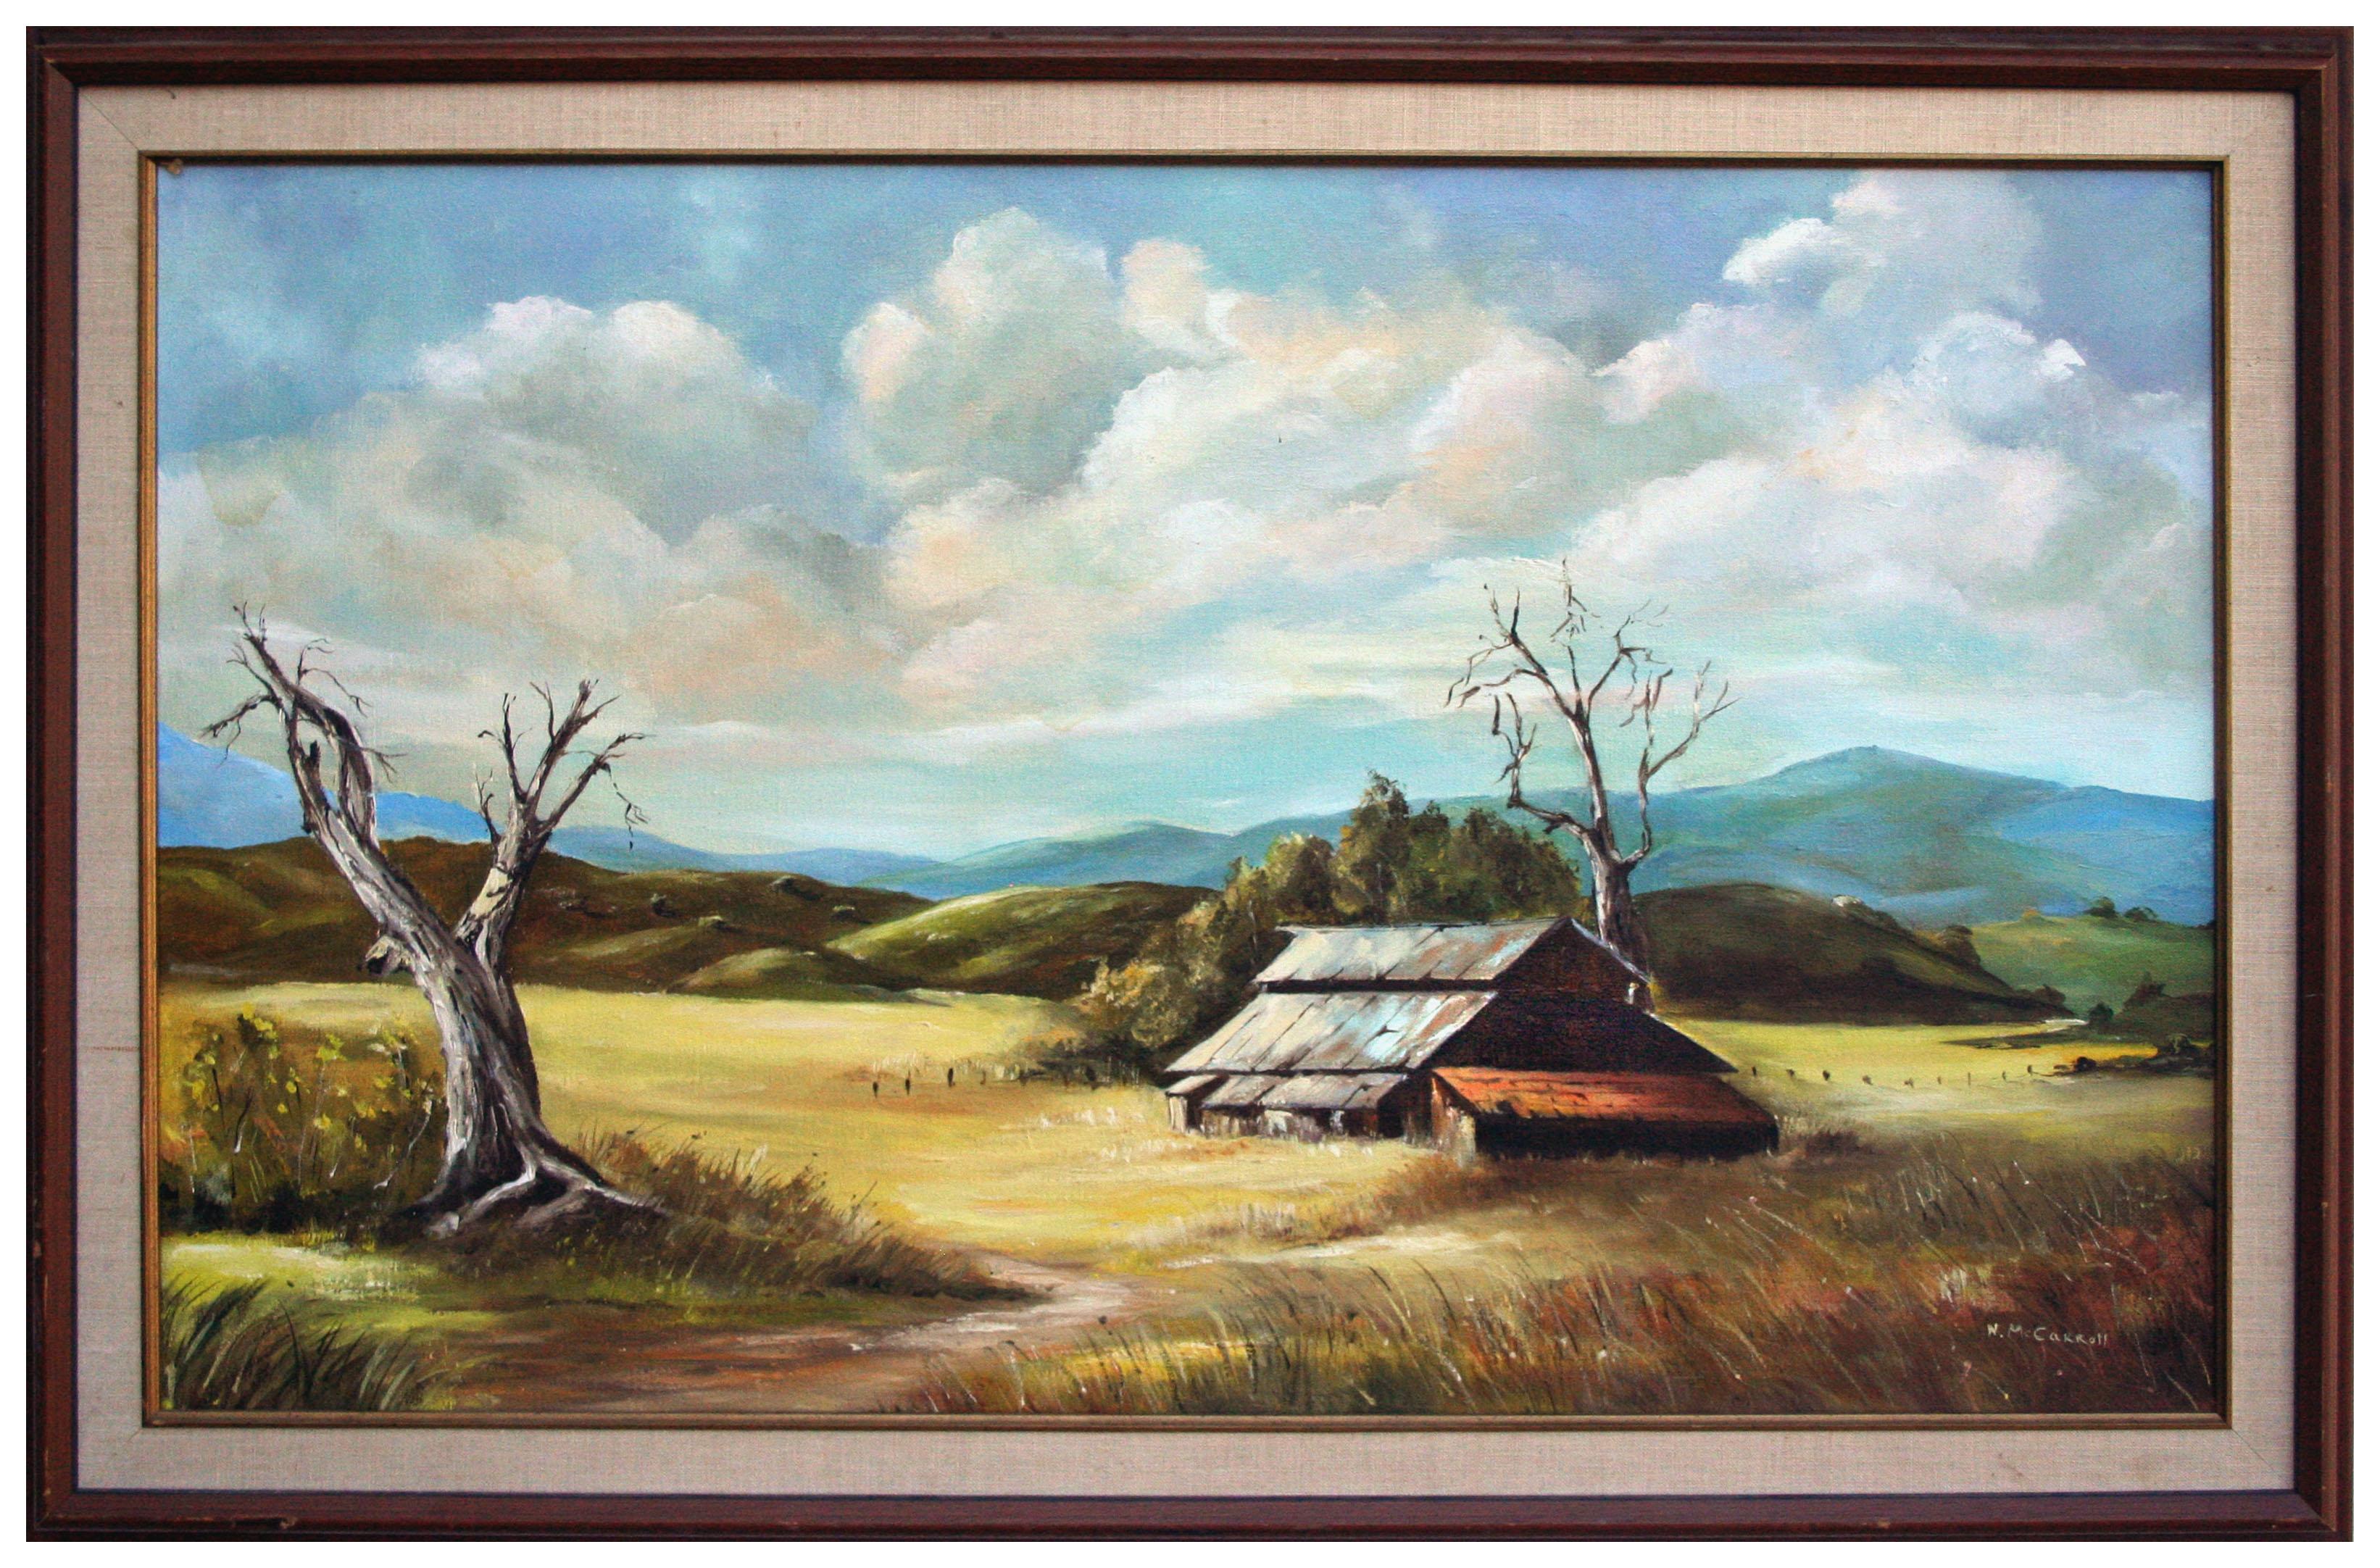 N. McCarroll Landscape Painting - Vintage California Gold Country Landscape with Barn 